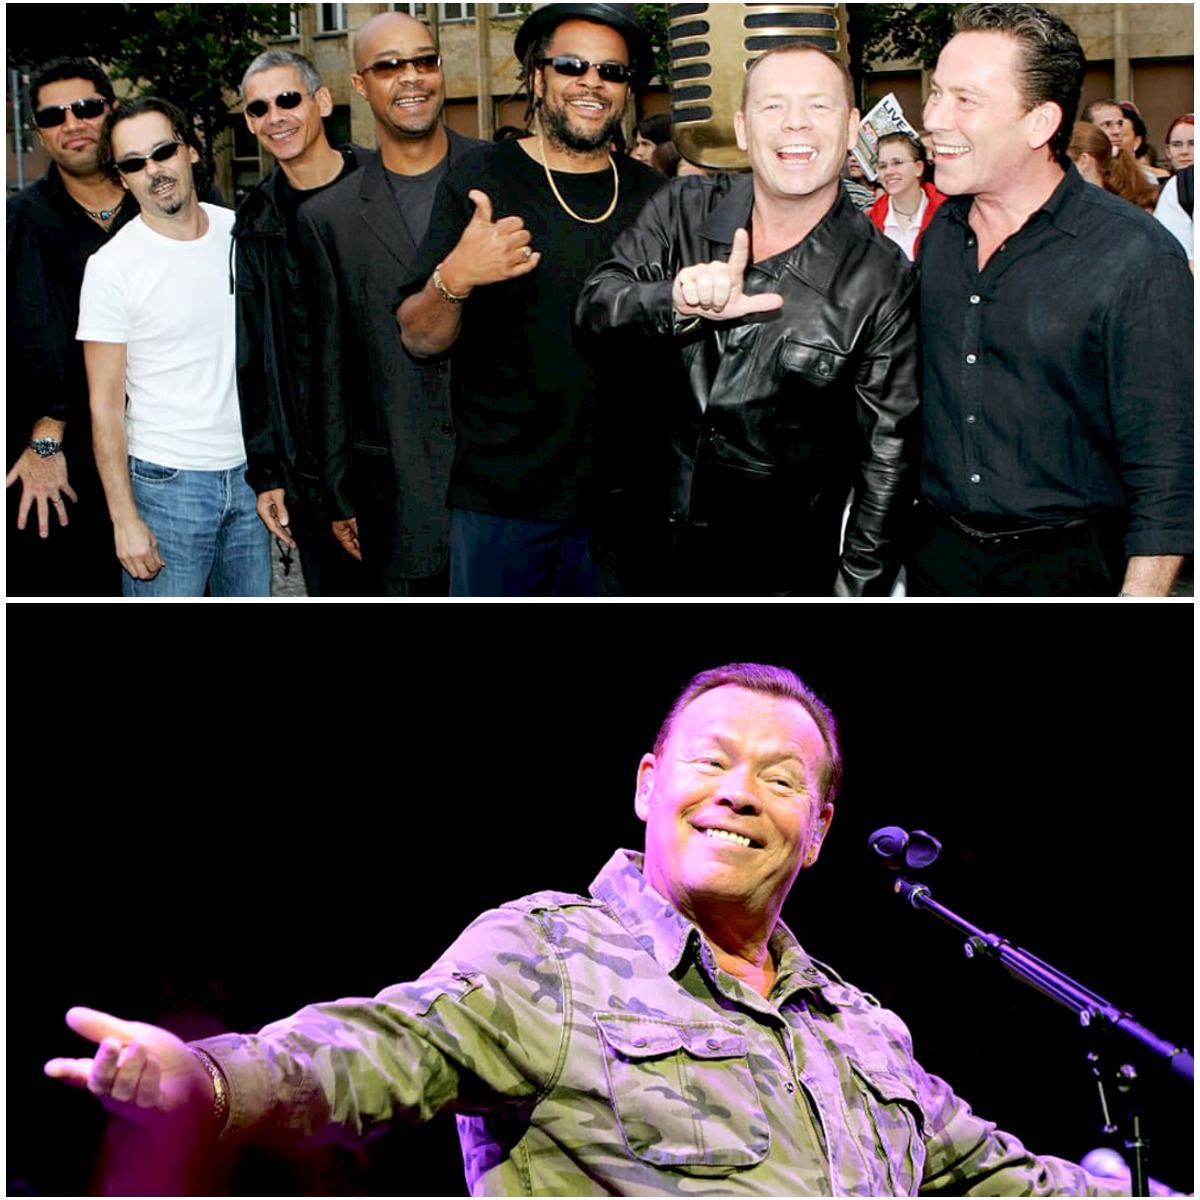 UB40’S Response to Ali Campbell: It’s time to set the record straight and make the position very clear, between UB40 and Ali Campbell